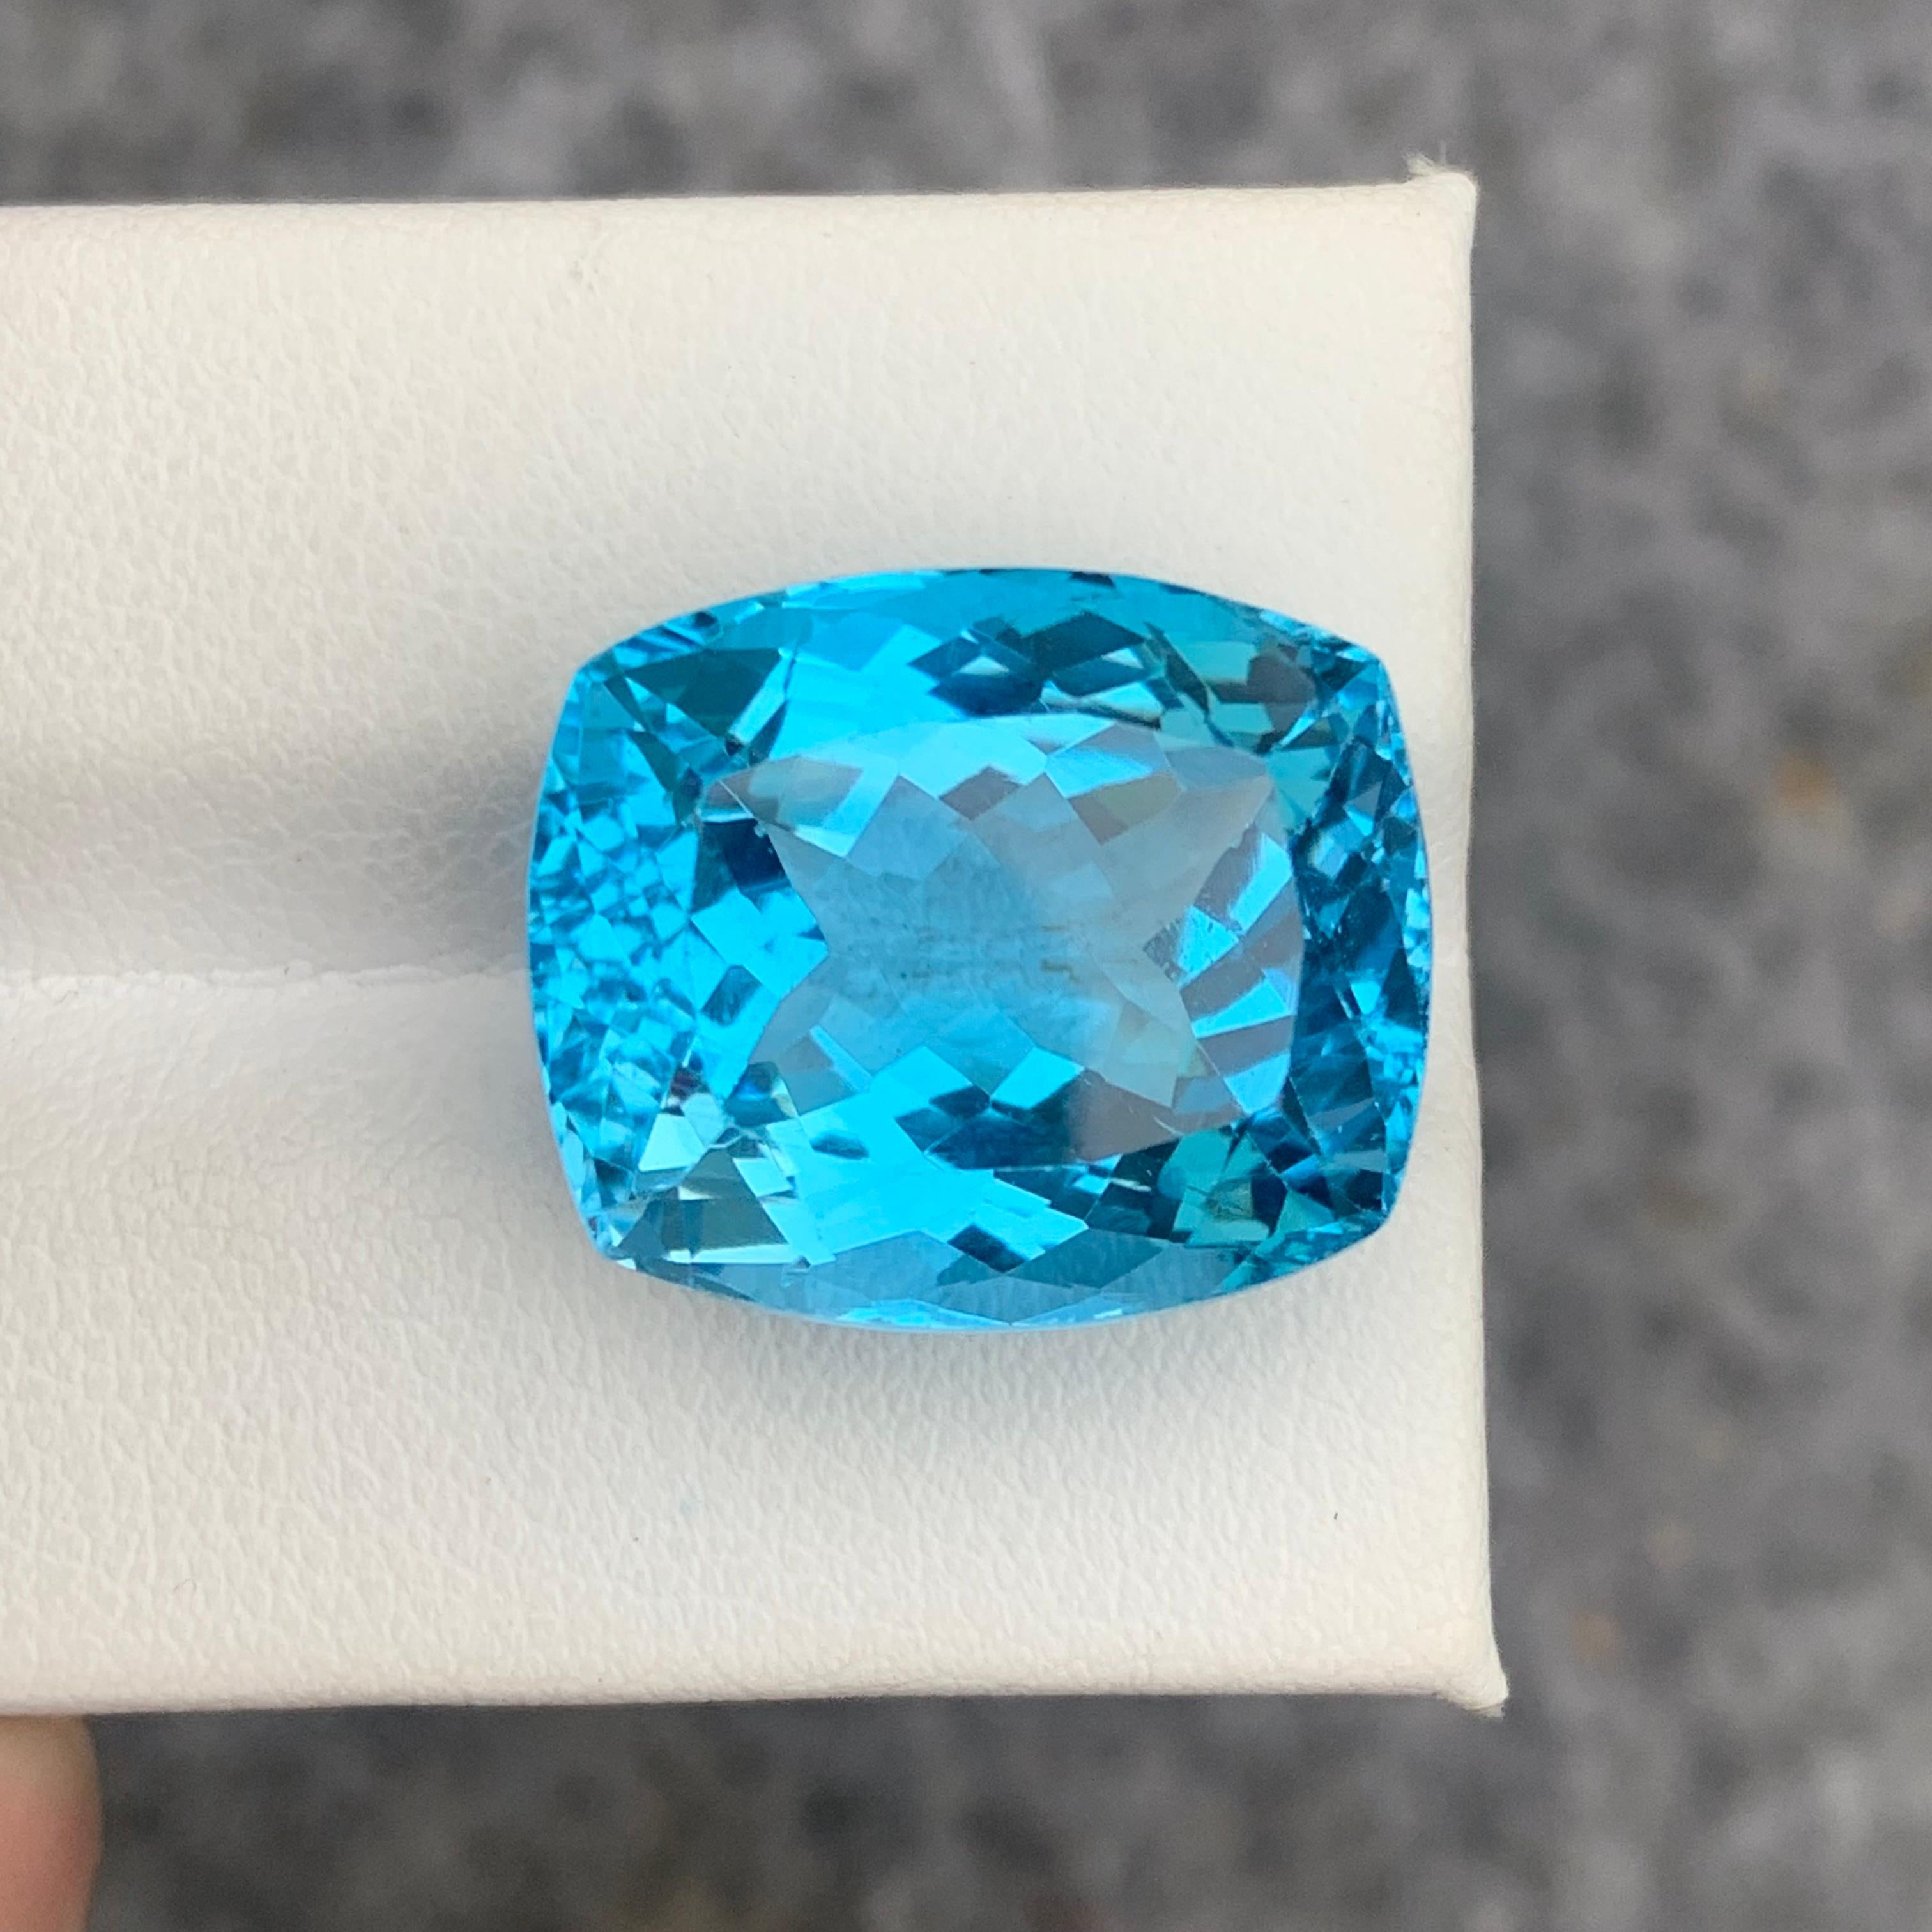 Gorgeous 31.10 Carat Loose Blue Topaz from Brazil Long Cushion Cut for Jewelry For Sale 7